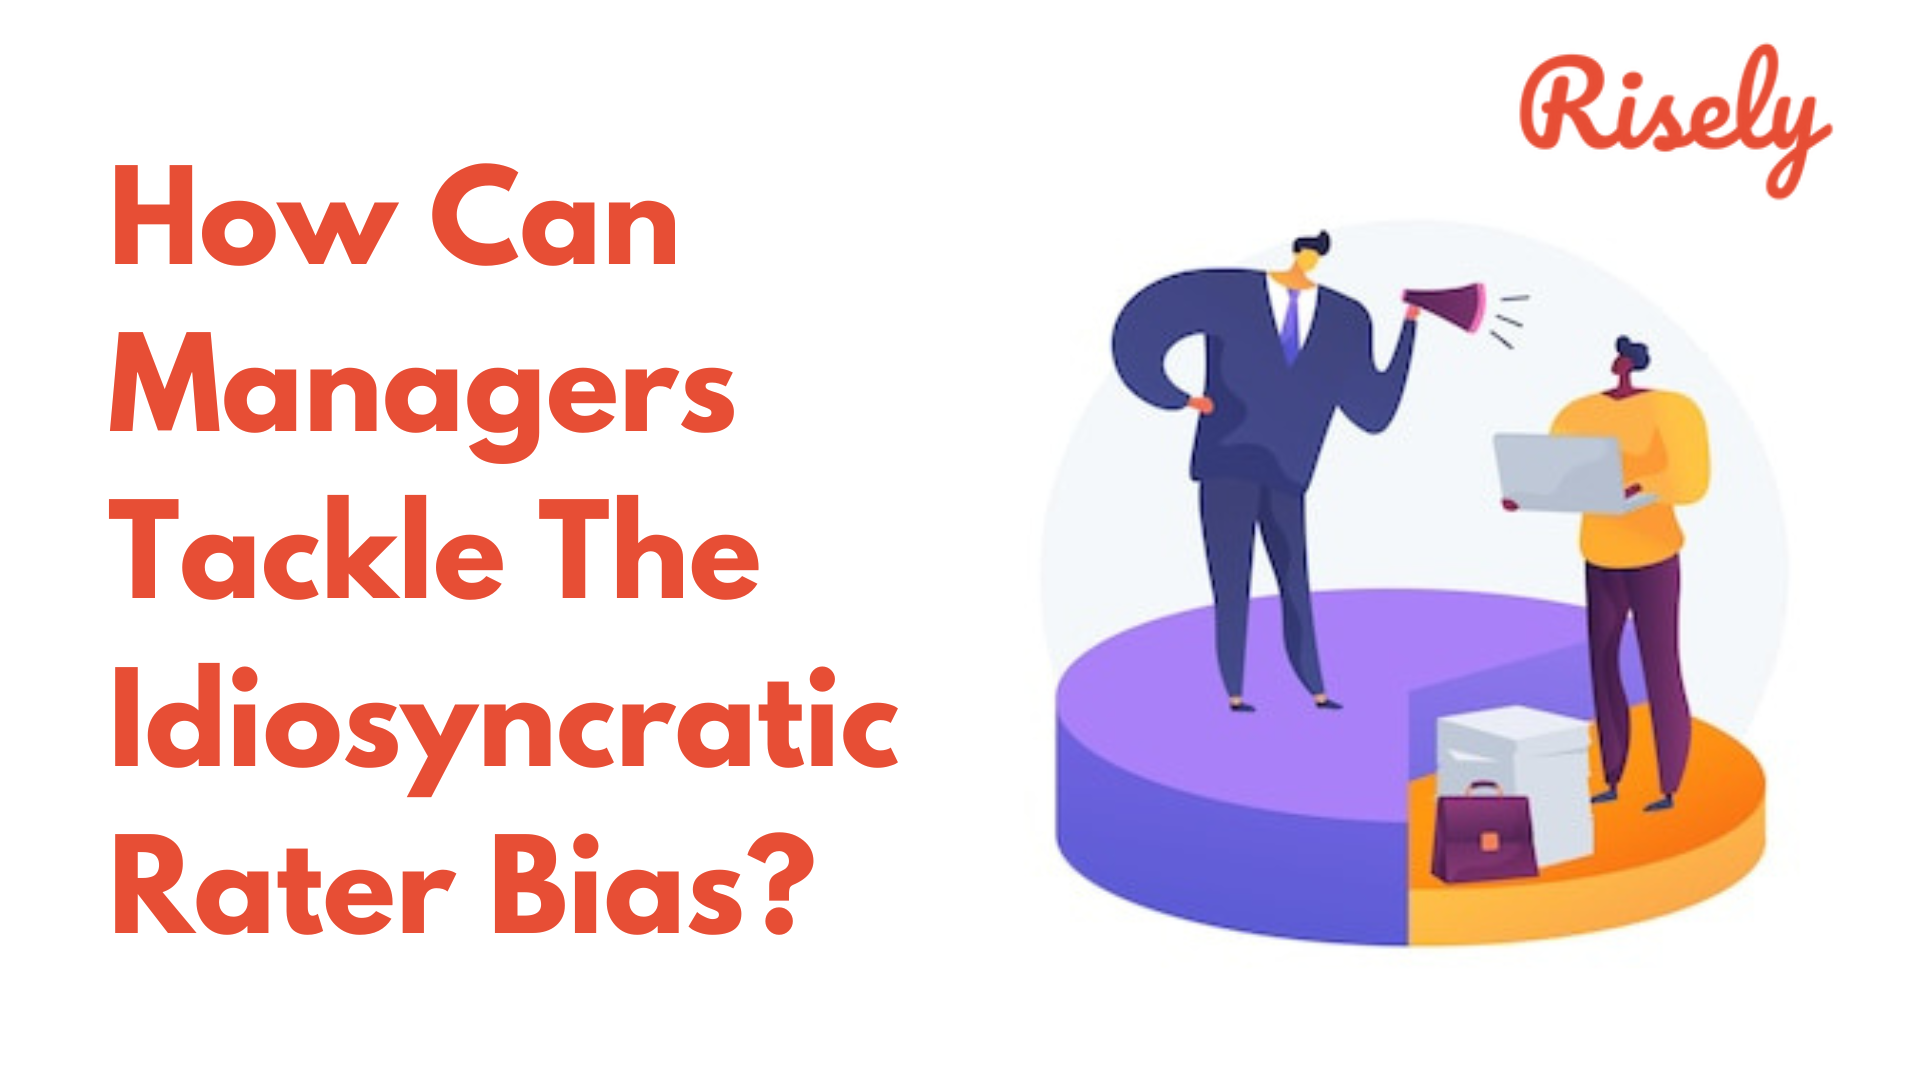 How Can Managers Tackle The Idiosyncratic Rater Bias?